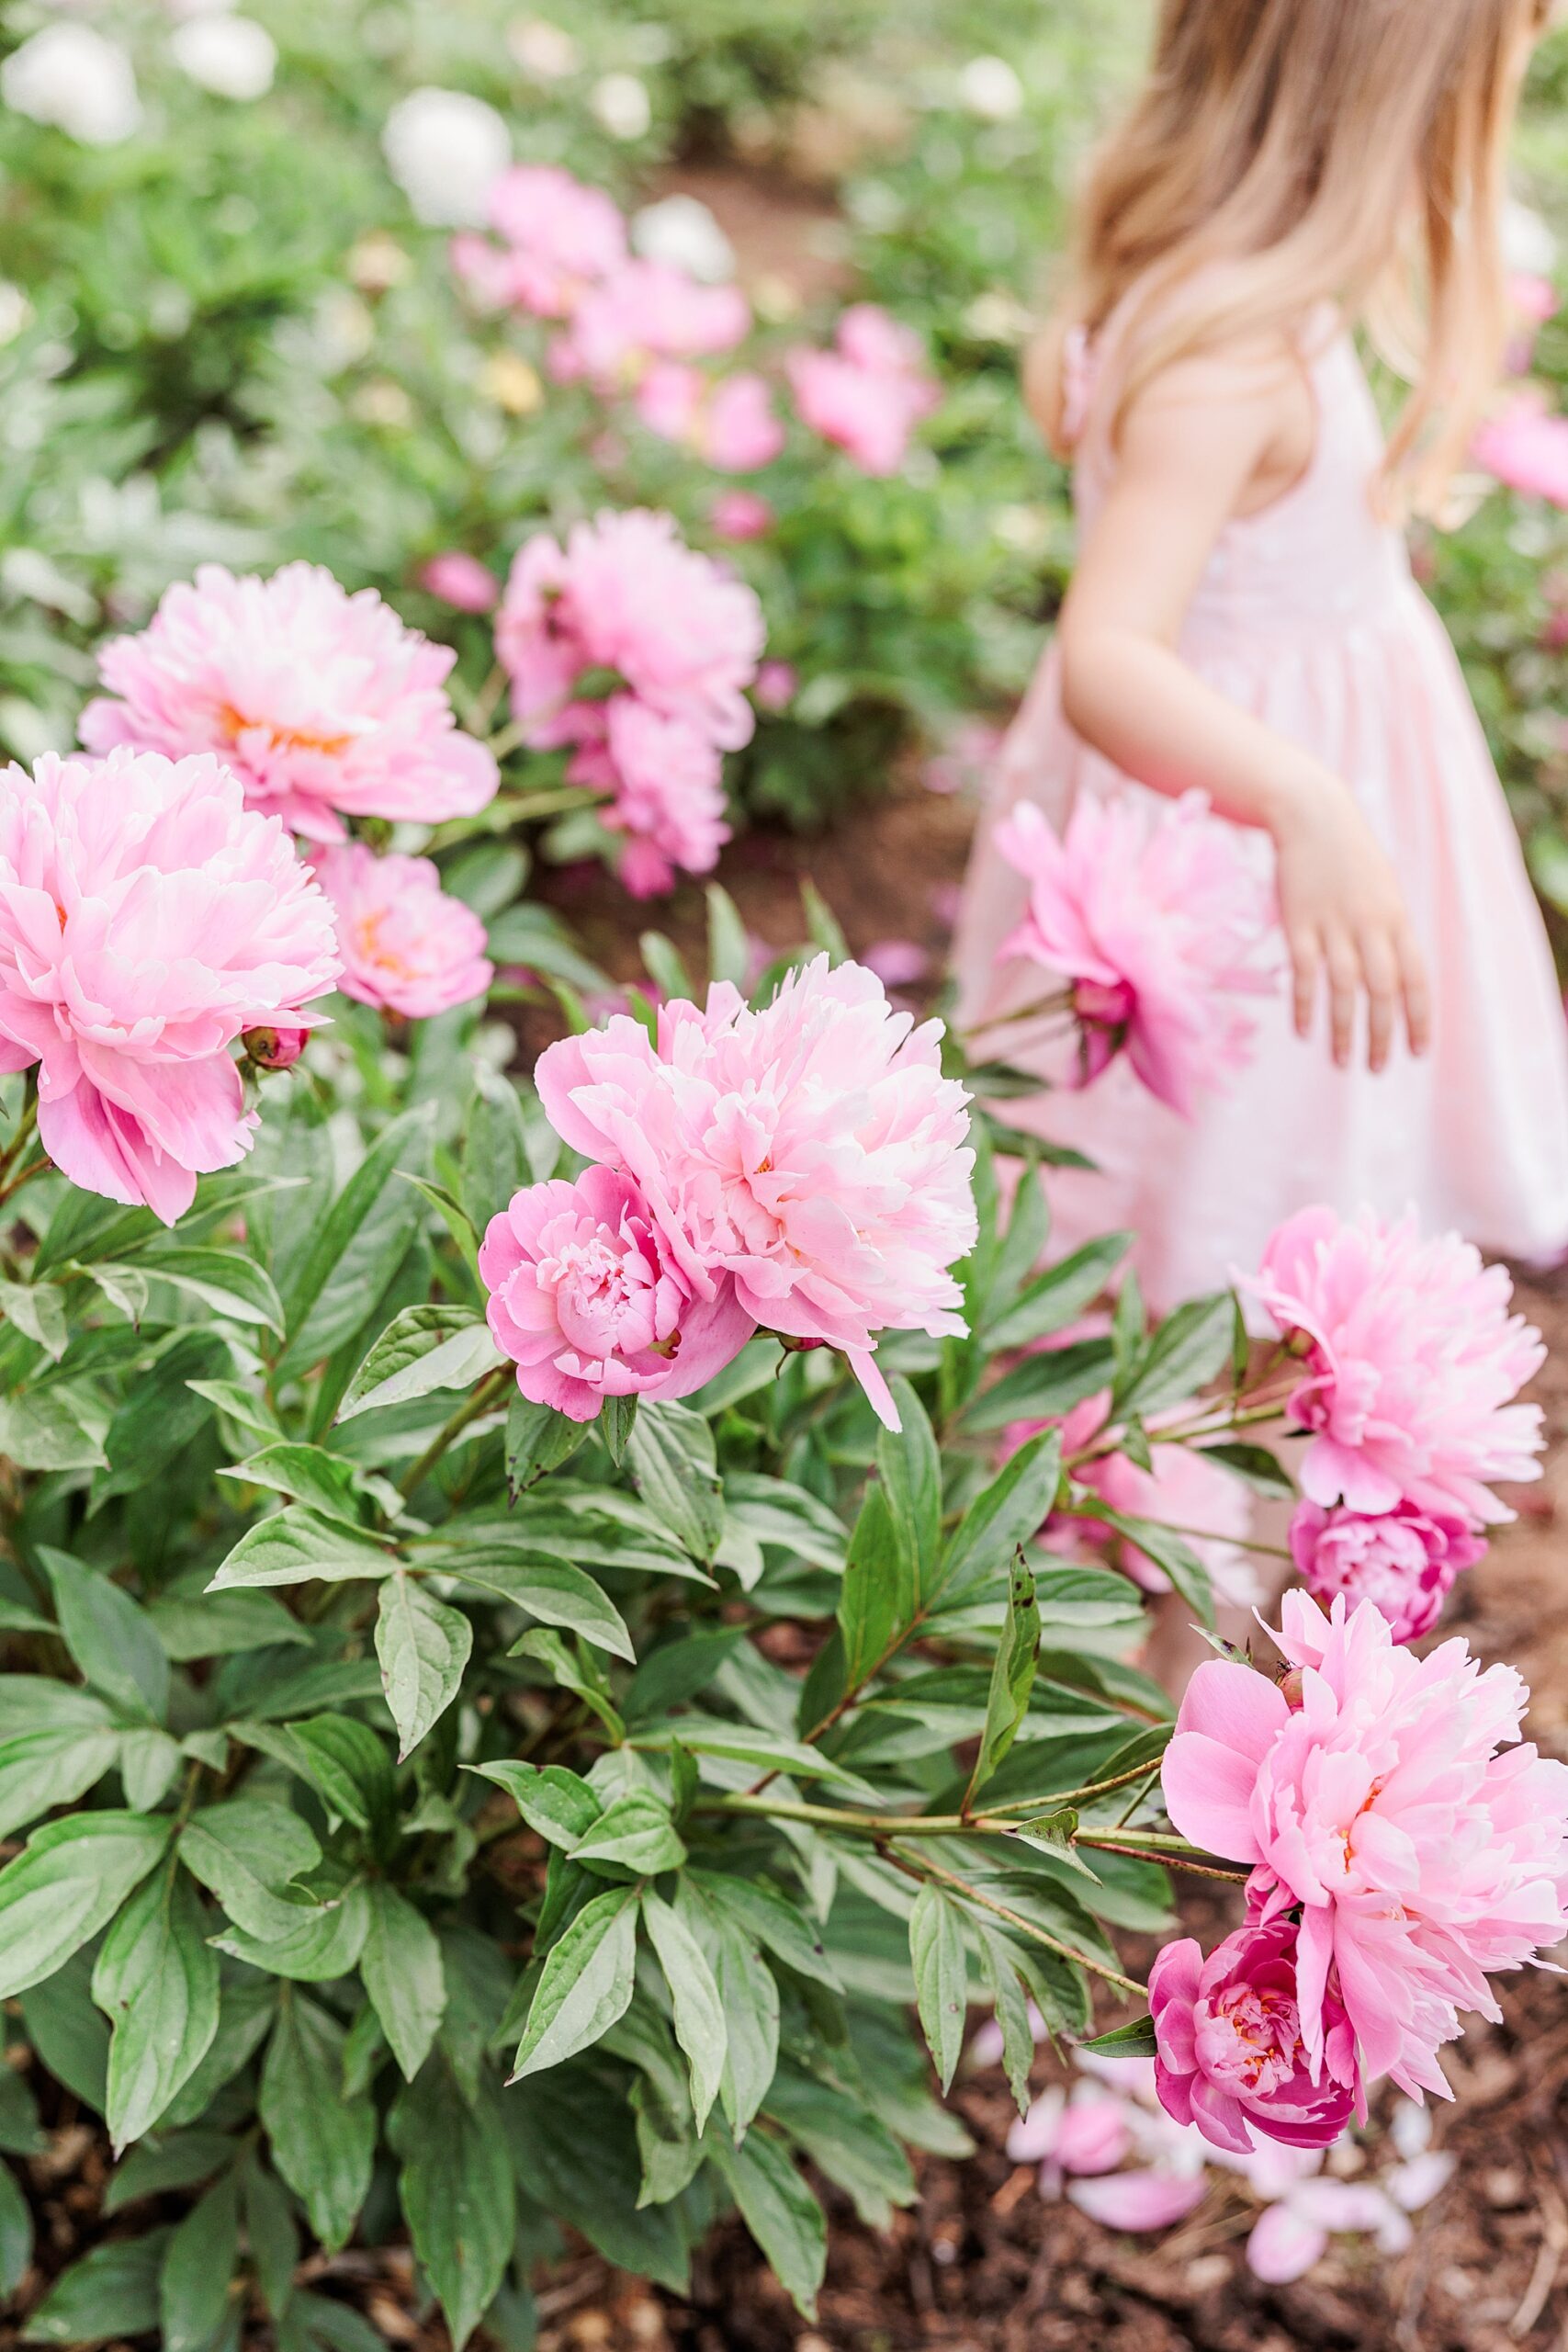 girl plays in field with pink peonies